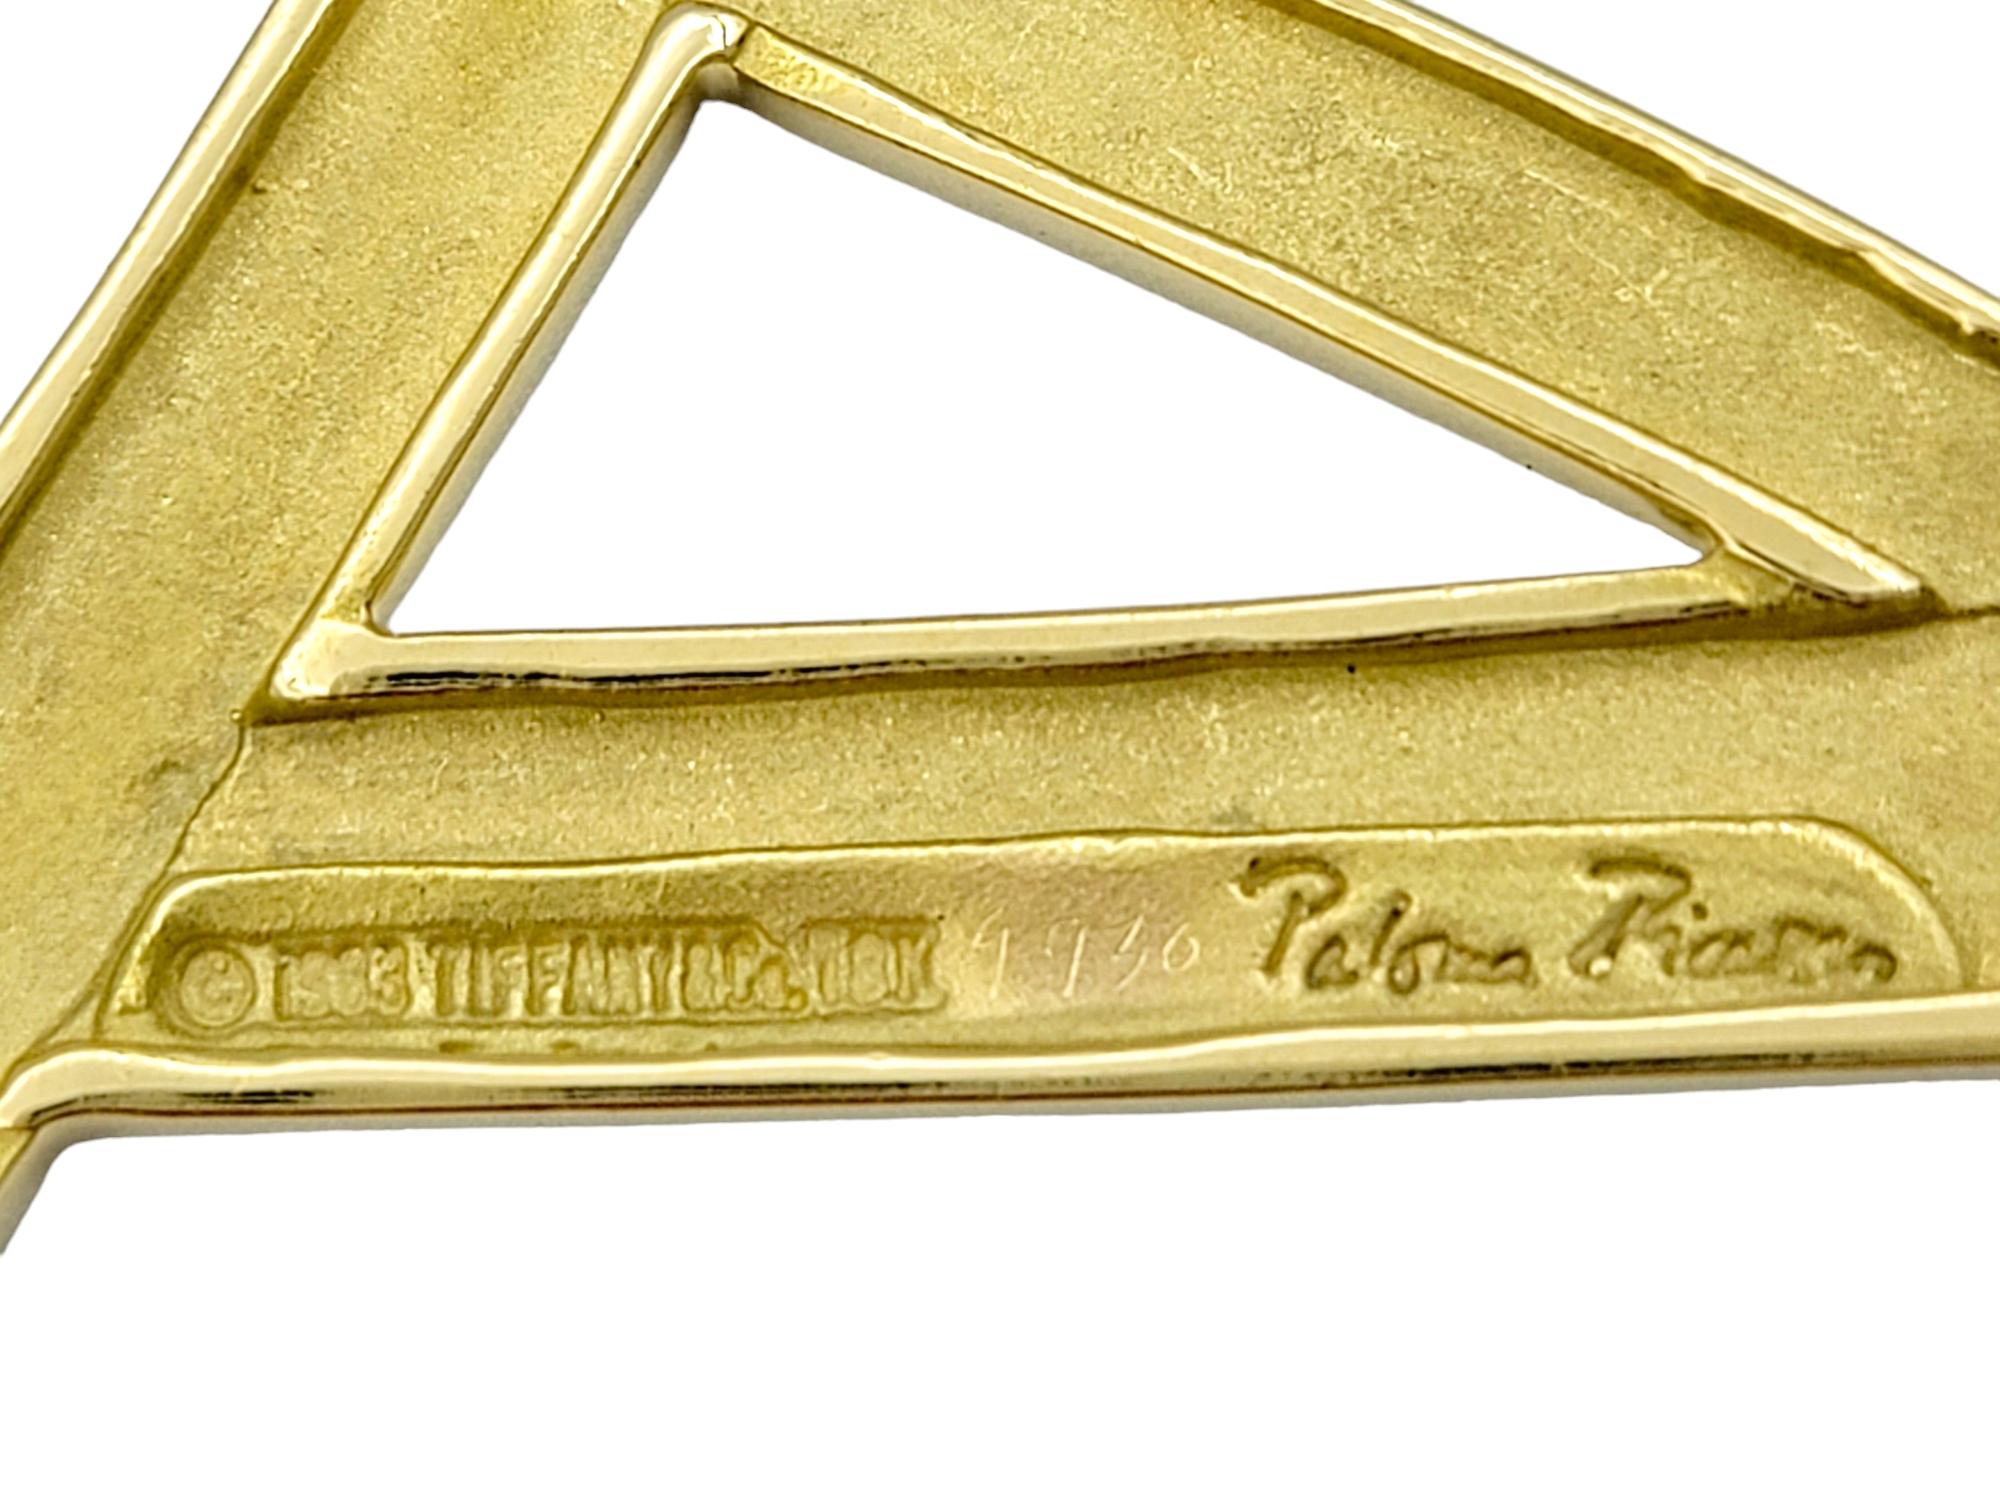 Tiffany & Co. Paloma Picasso Asymmetrical Star Brooch in 18 Karat Yellow Gold For Sale 1